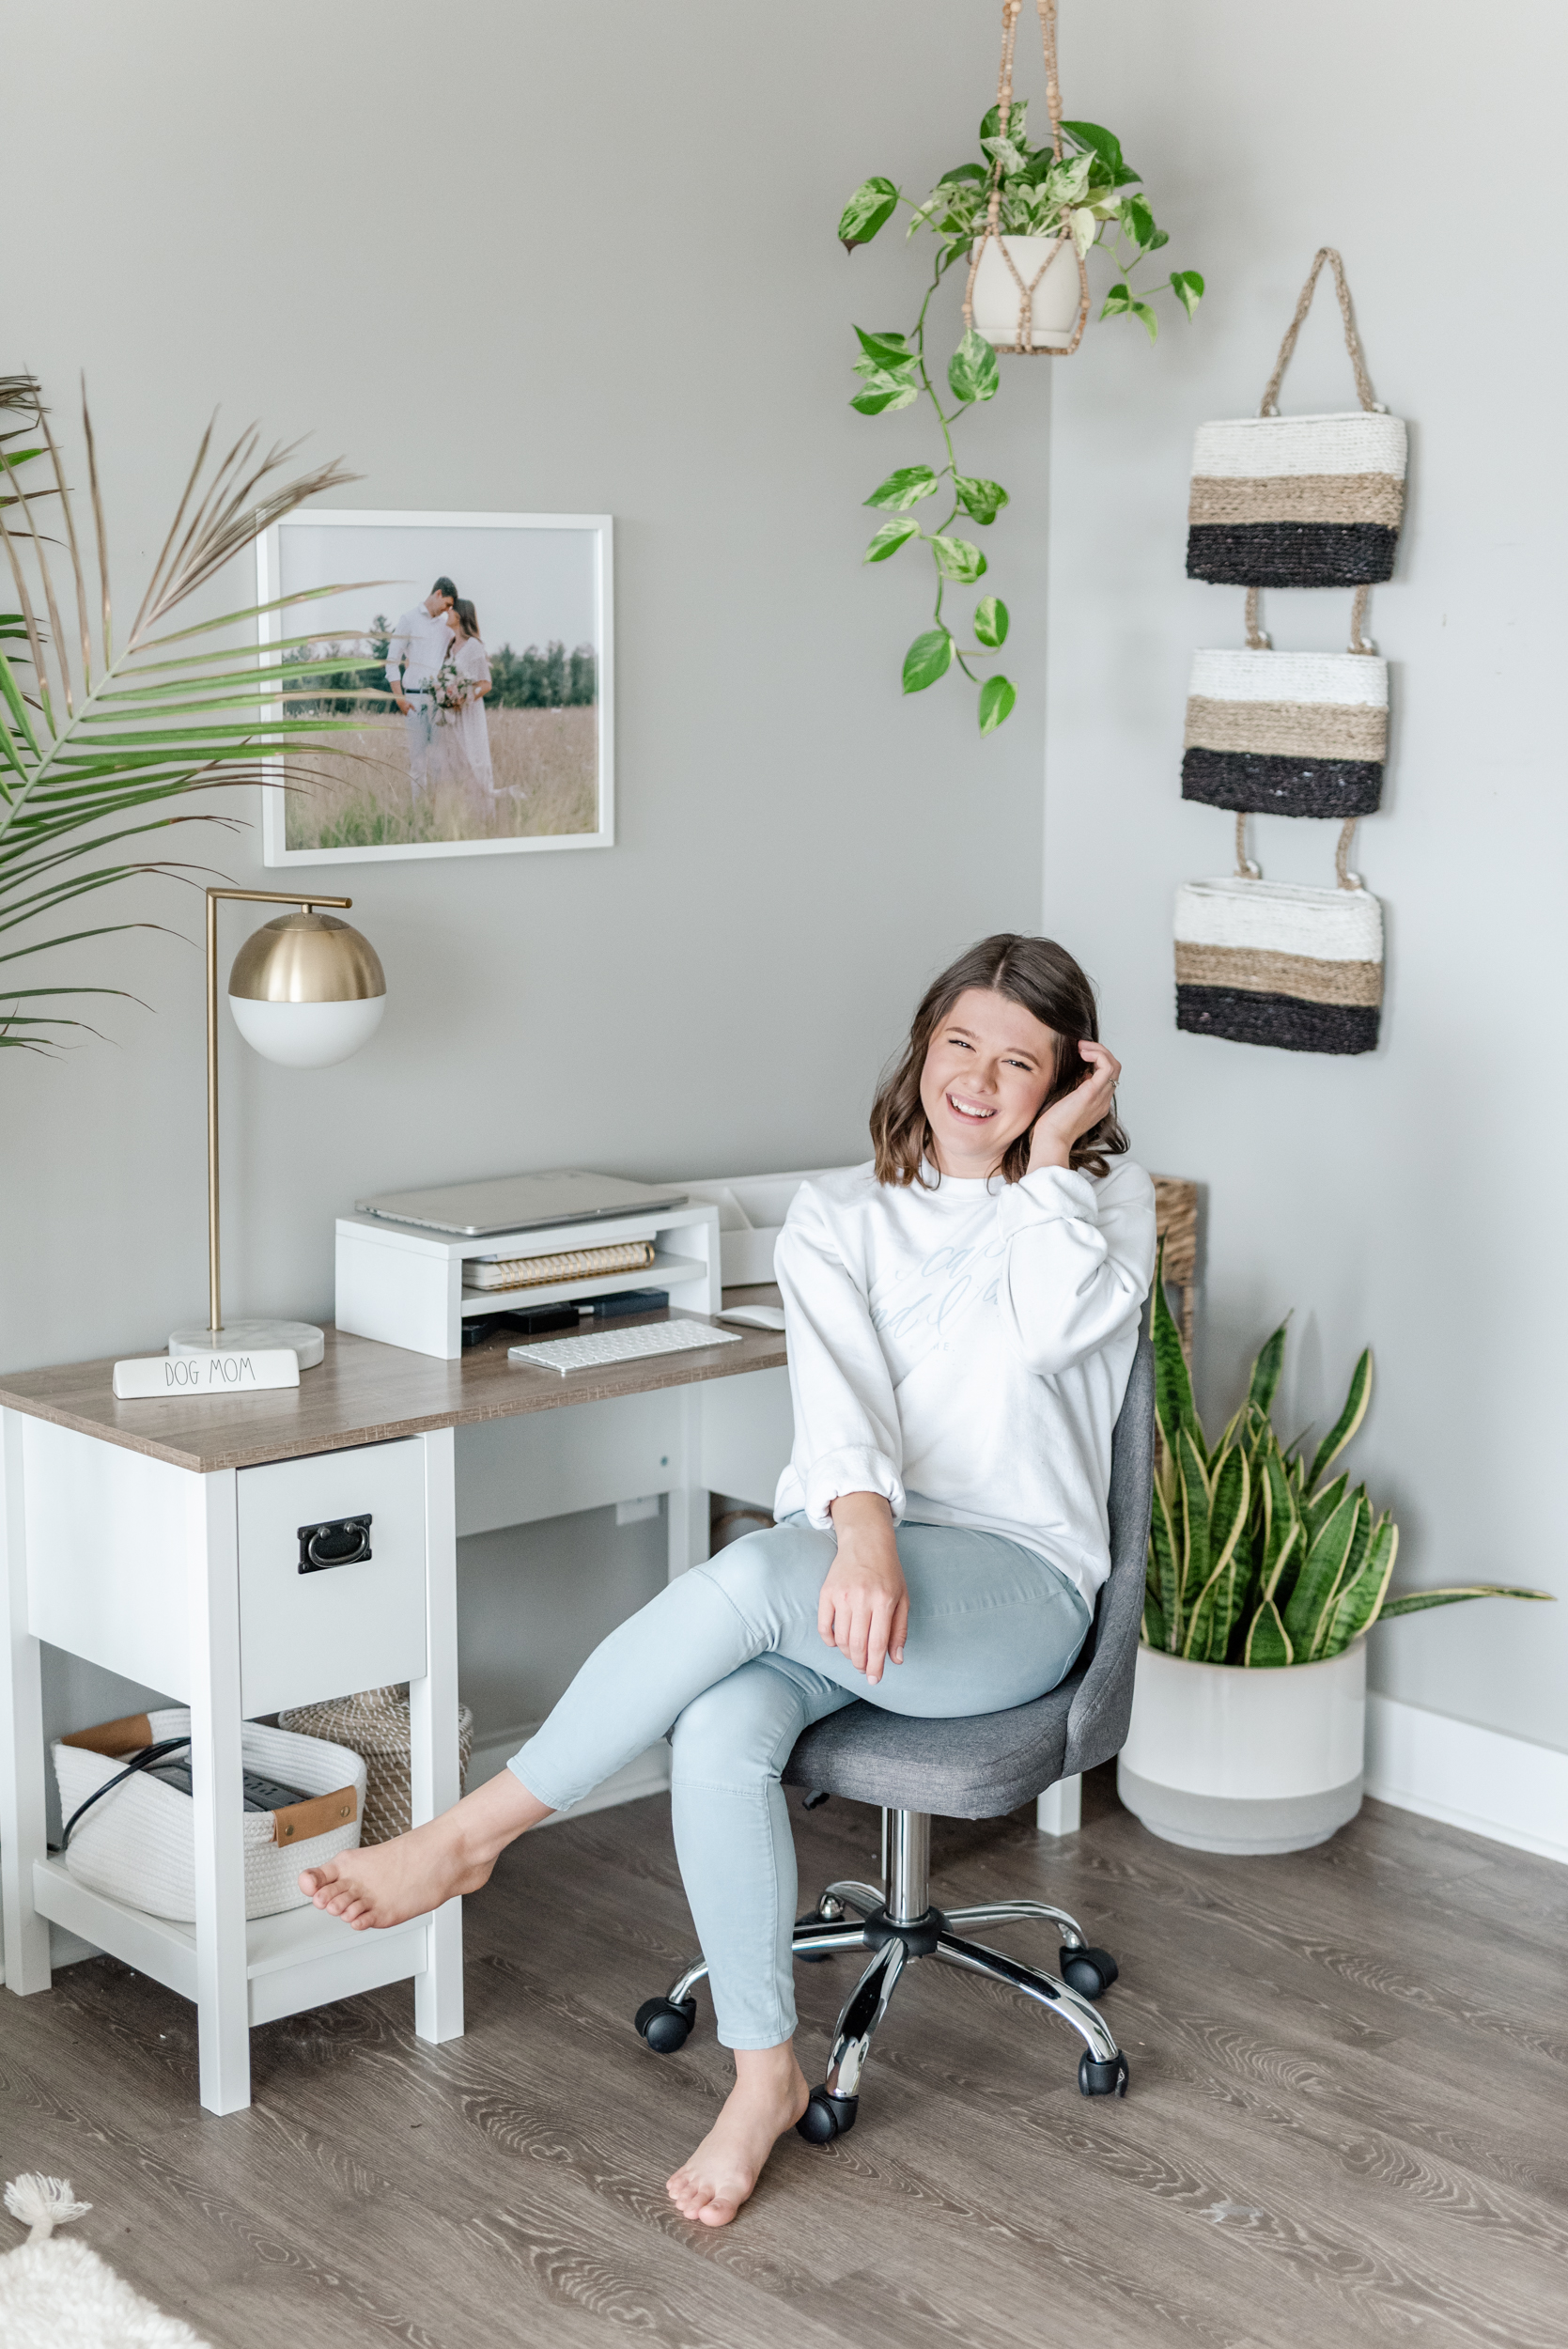 Home Office Tour with Stephanie Kase in small Ohio apartment